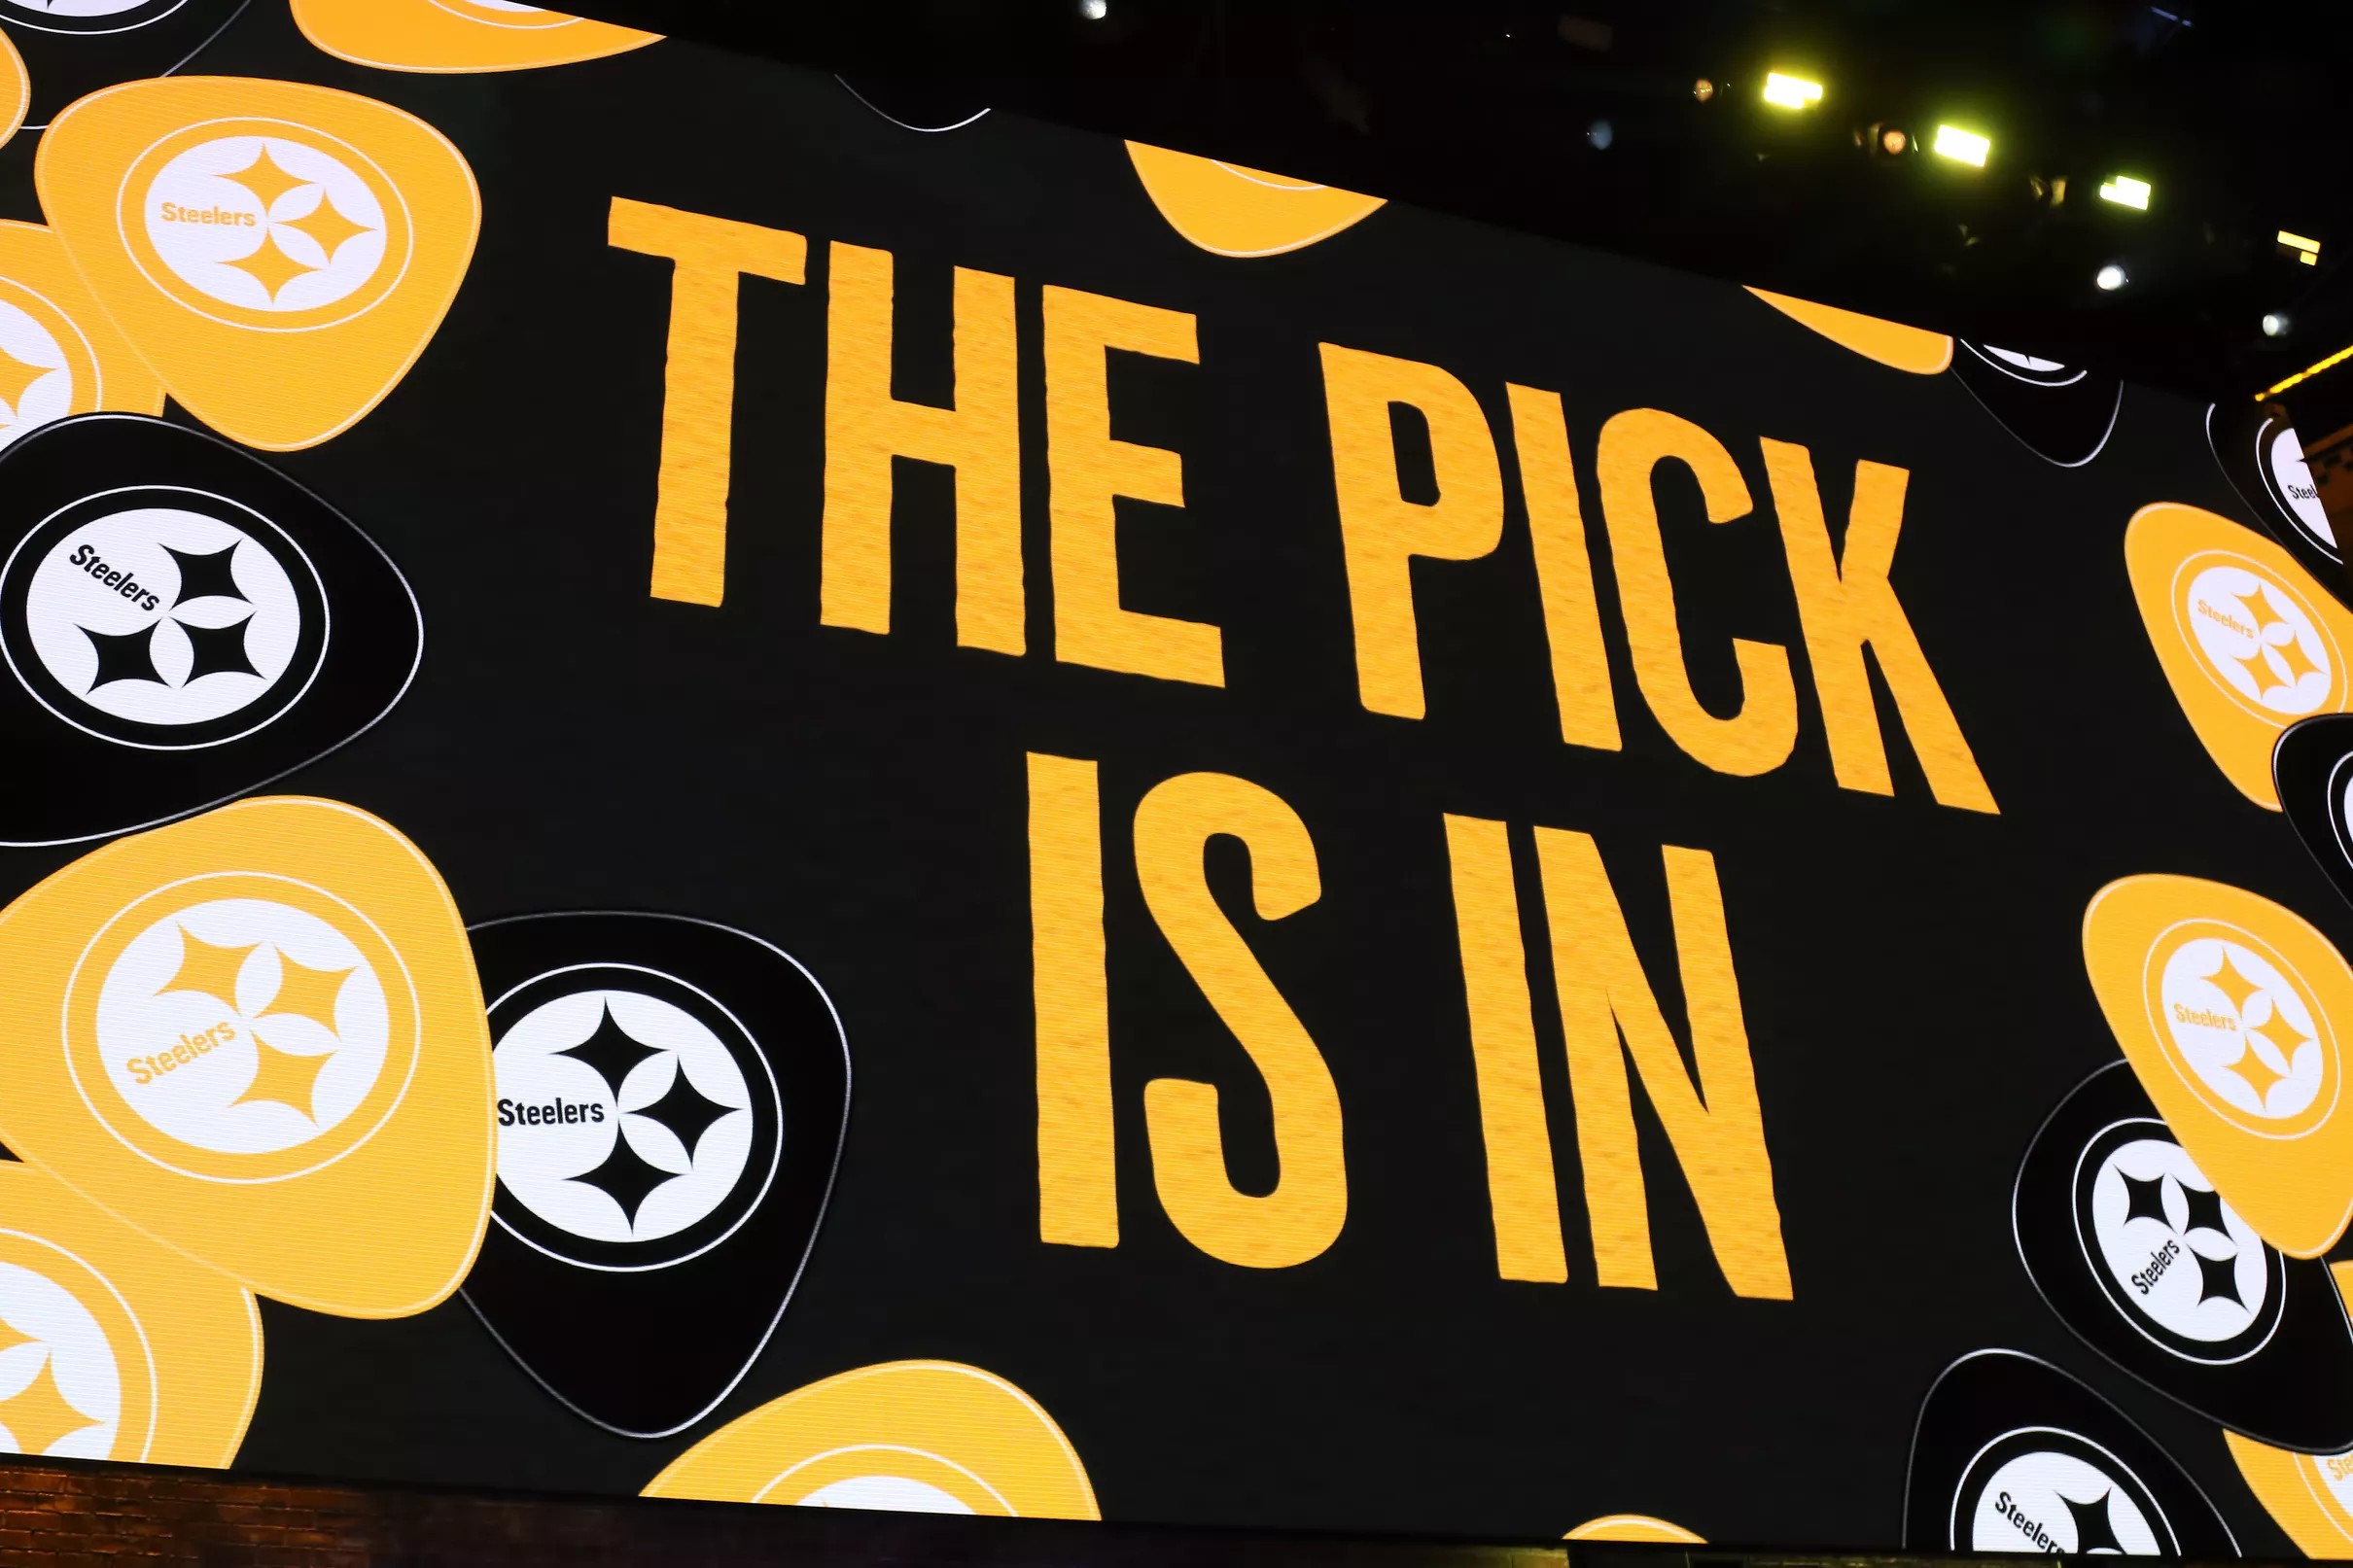 The Steelers officially get a 3rd round compensatory draft pick for the